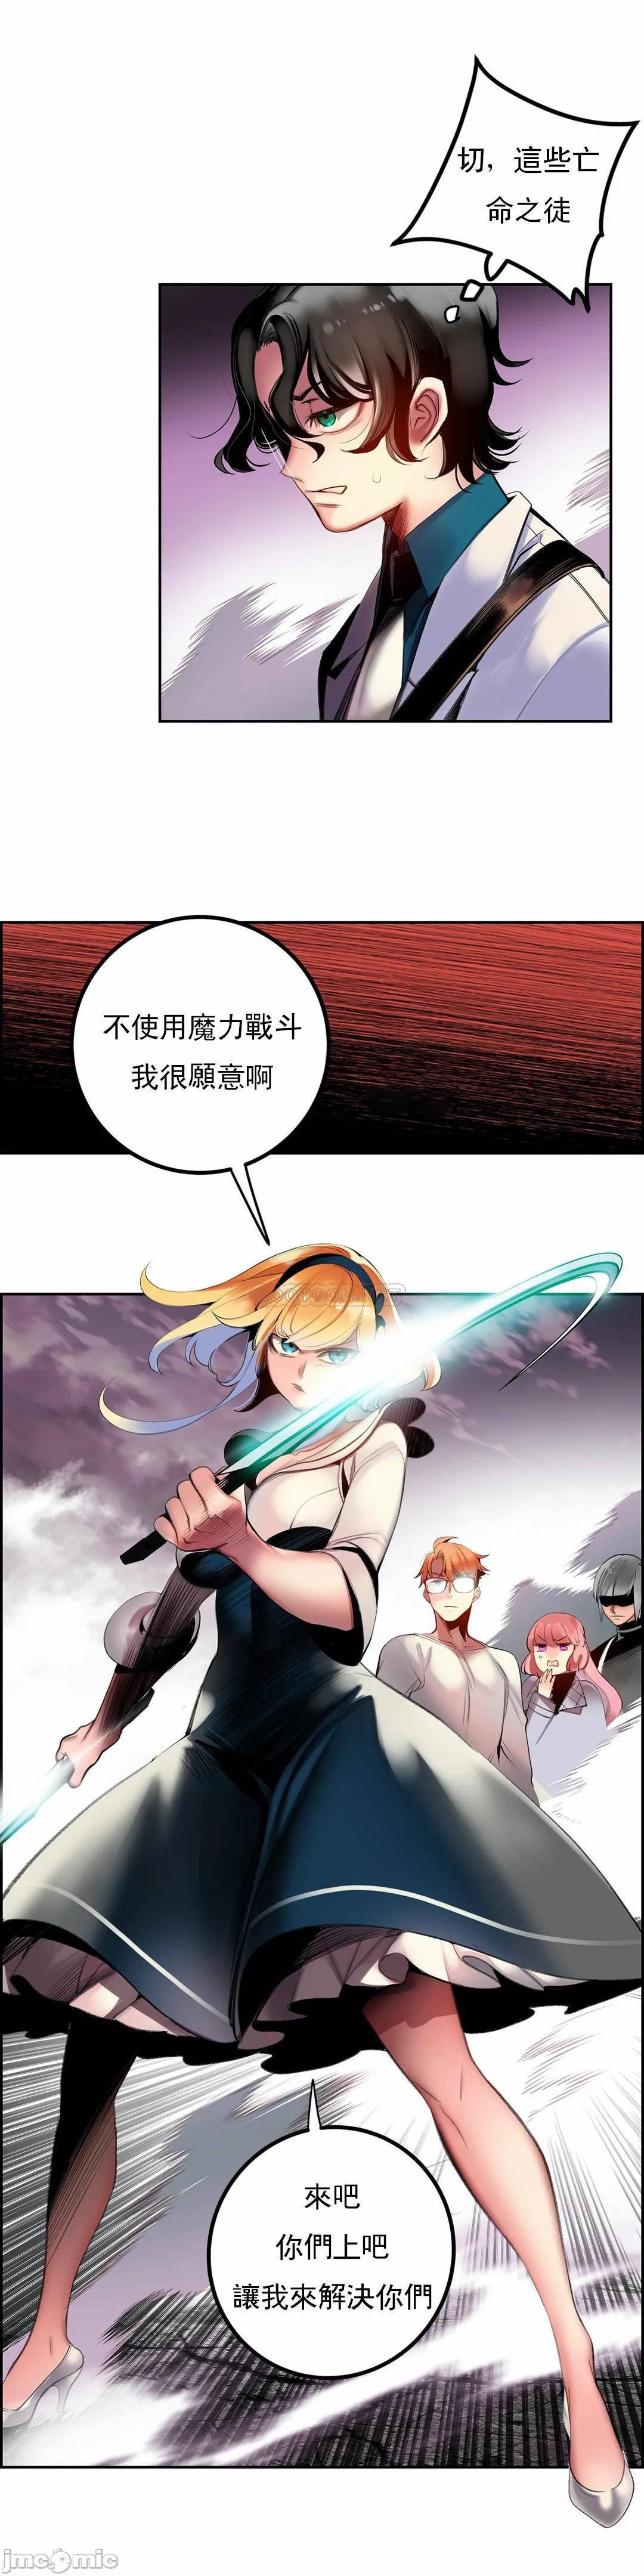 [Juder] Lilith`s Cord (第二季) Ch.77-93 end [Chinese] 357